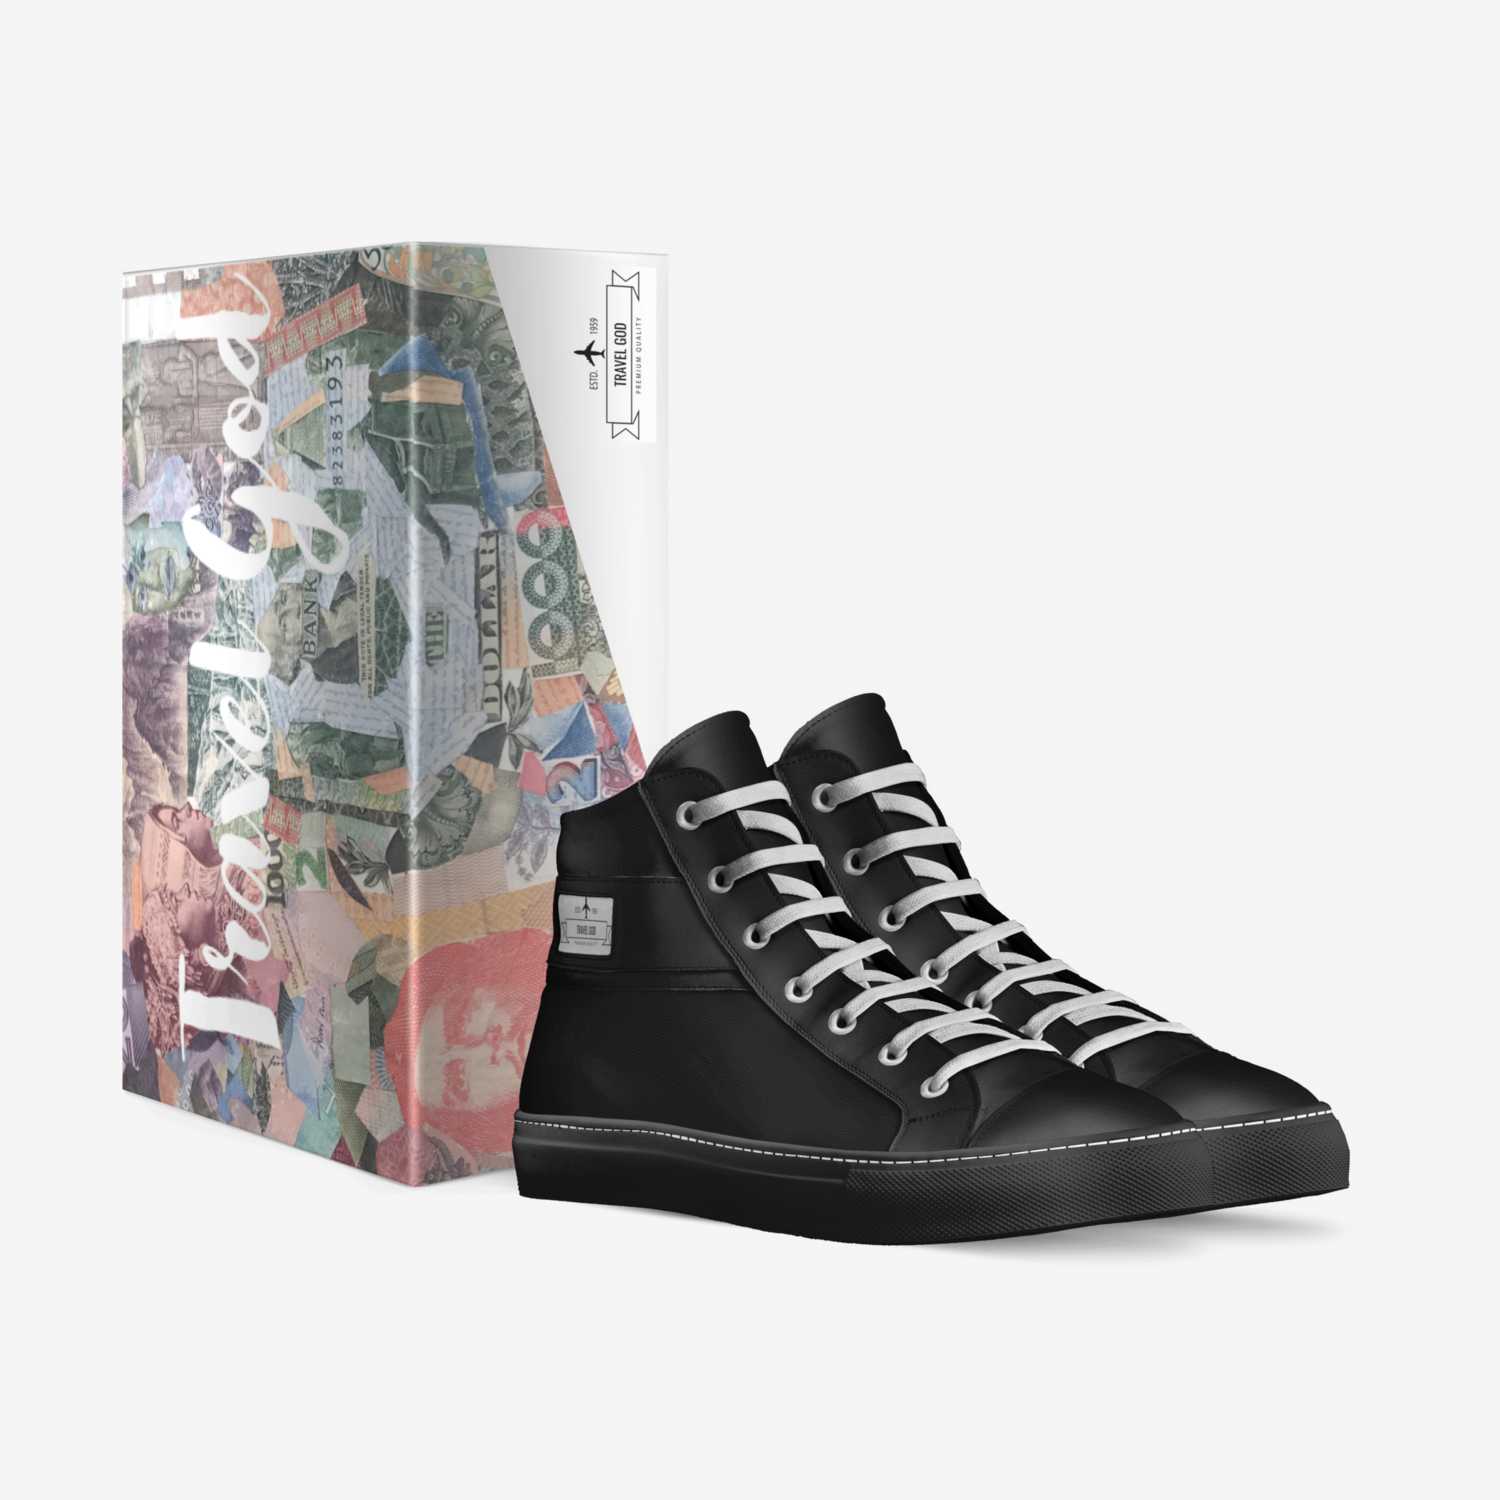 Travel God custom made in Italy shoes by Tommie Sox | Box view